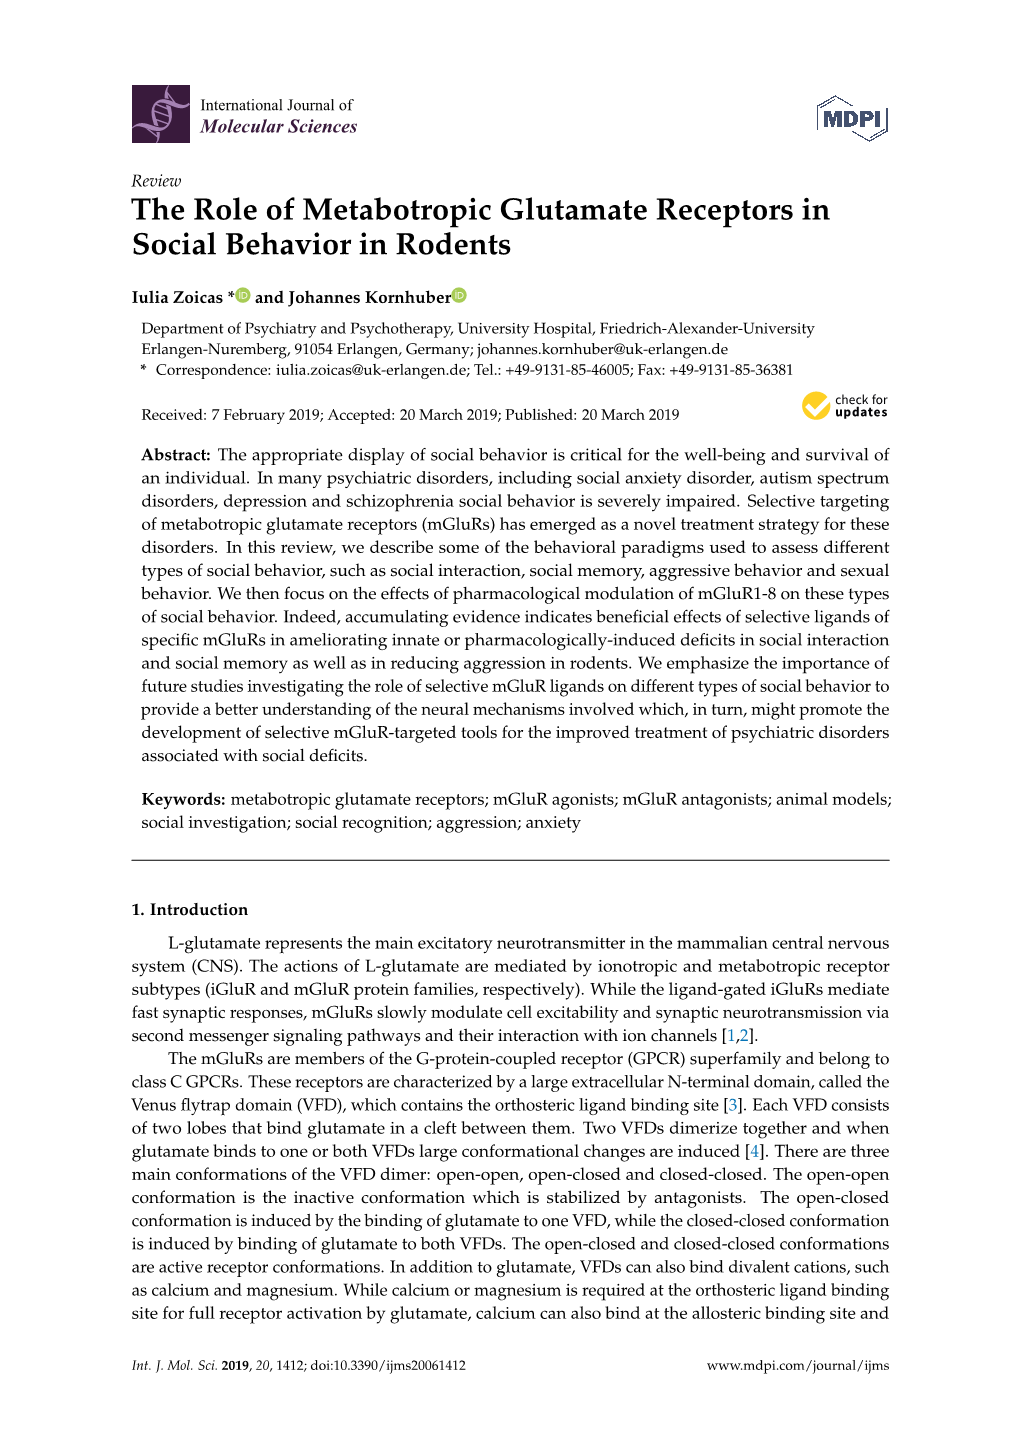 The Role of Metabotropic Glutamate Receptors in Social Behavior in Rodents